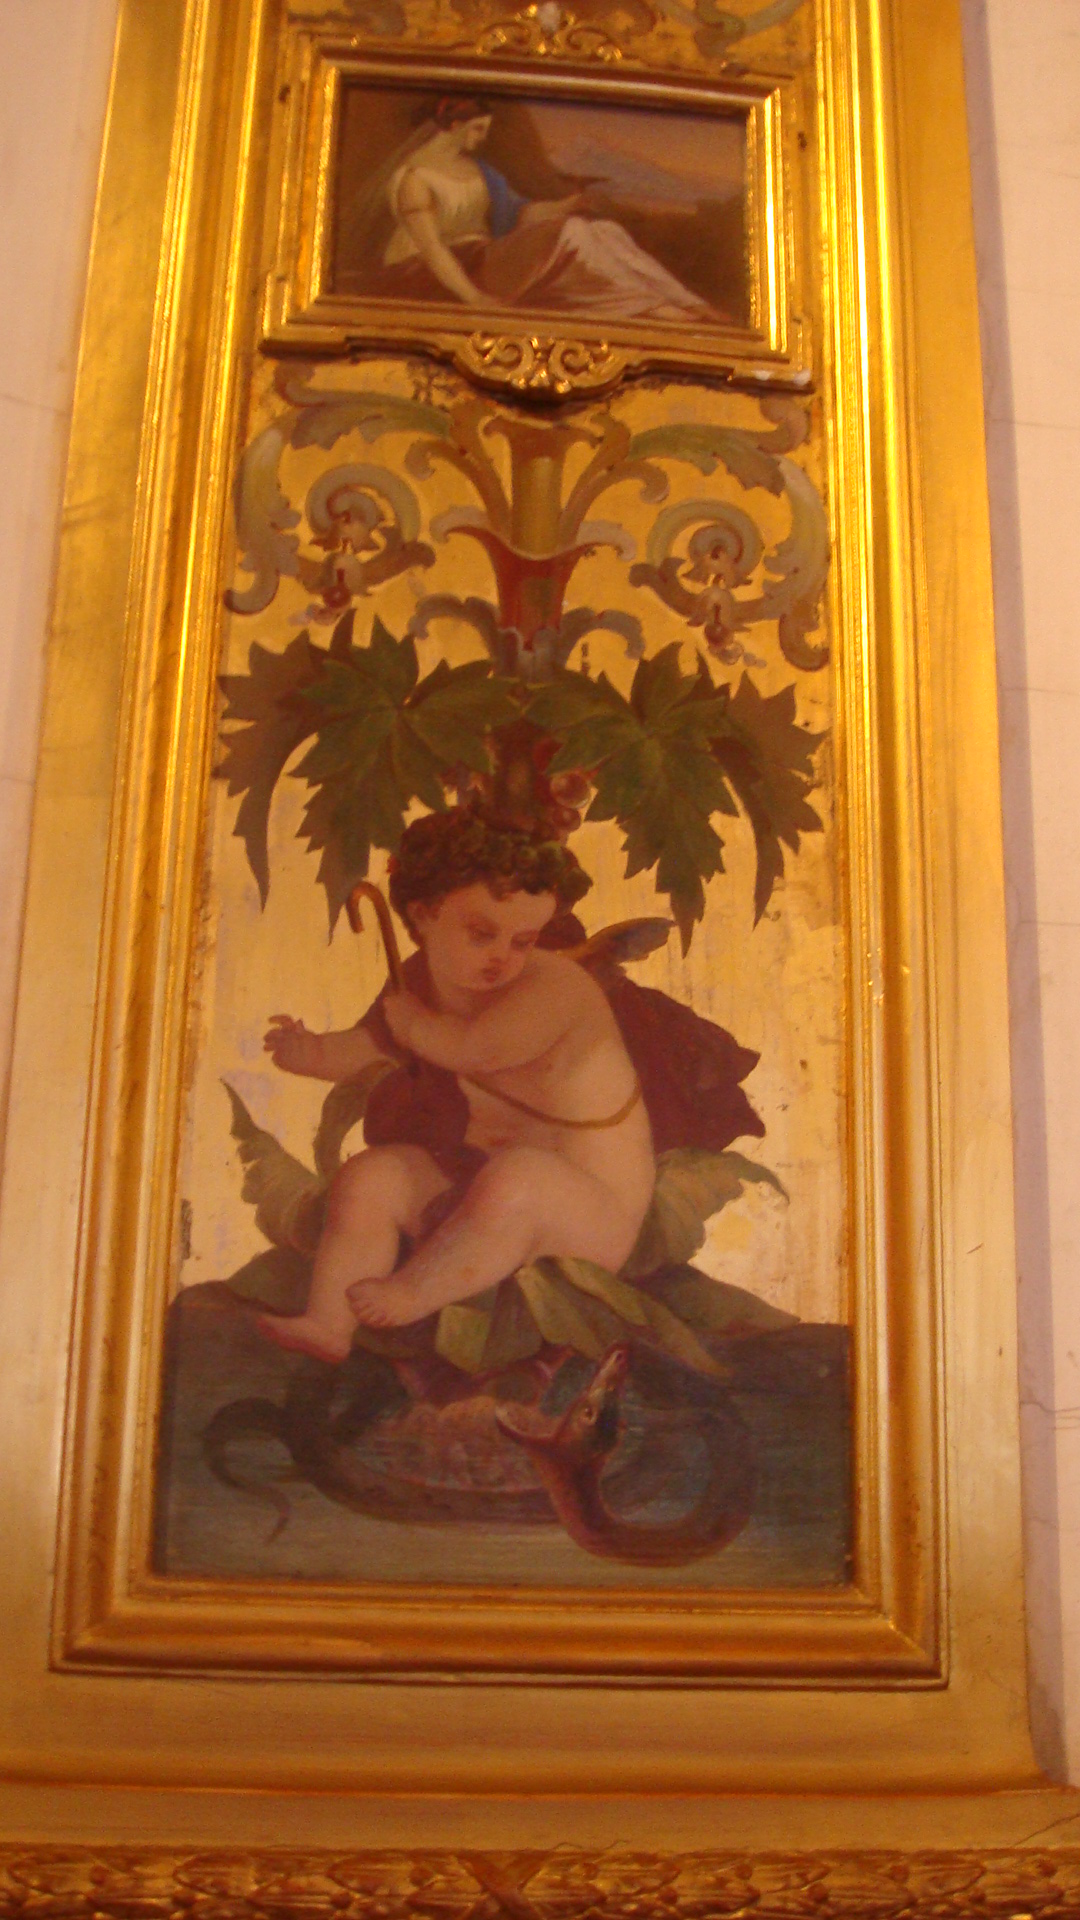 a painting on the wall is shown in a gold frame